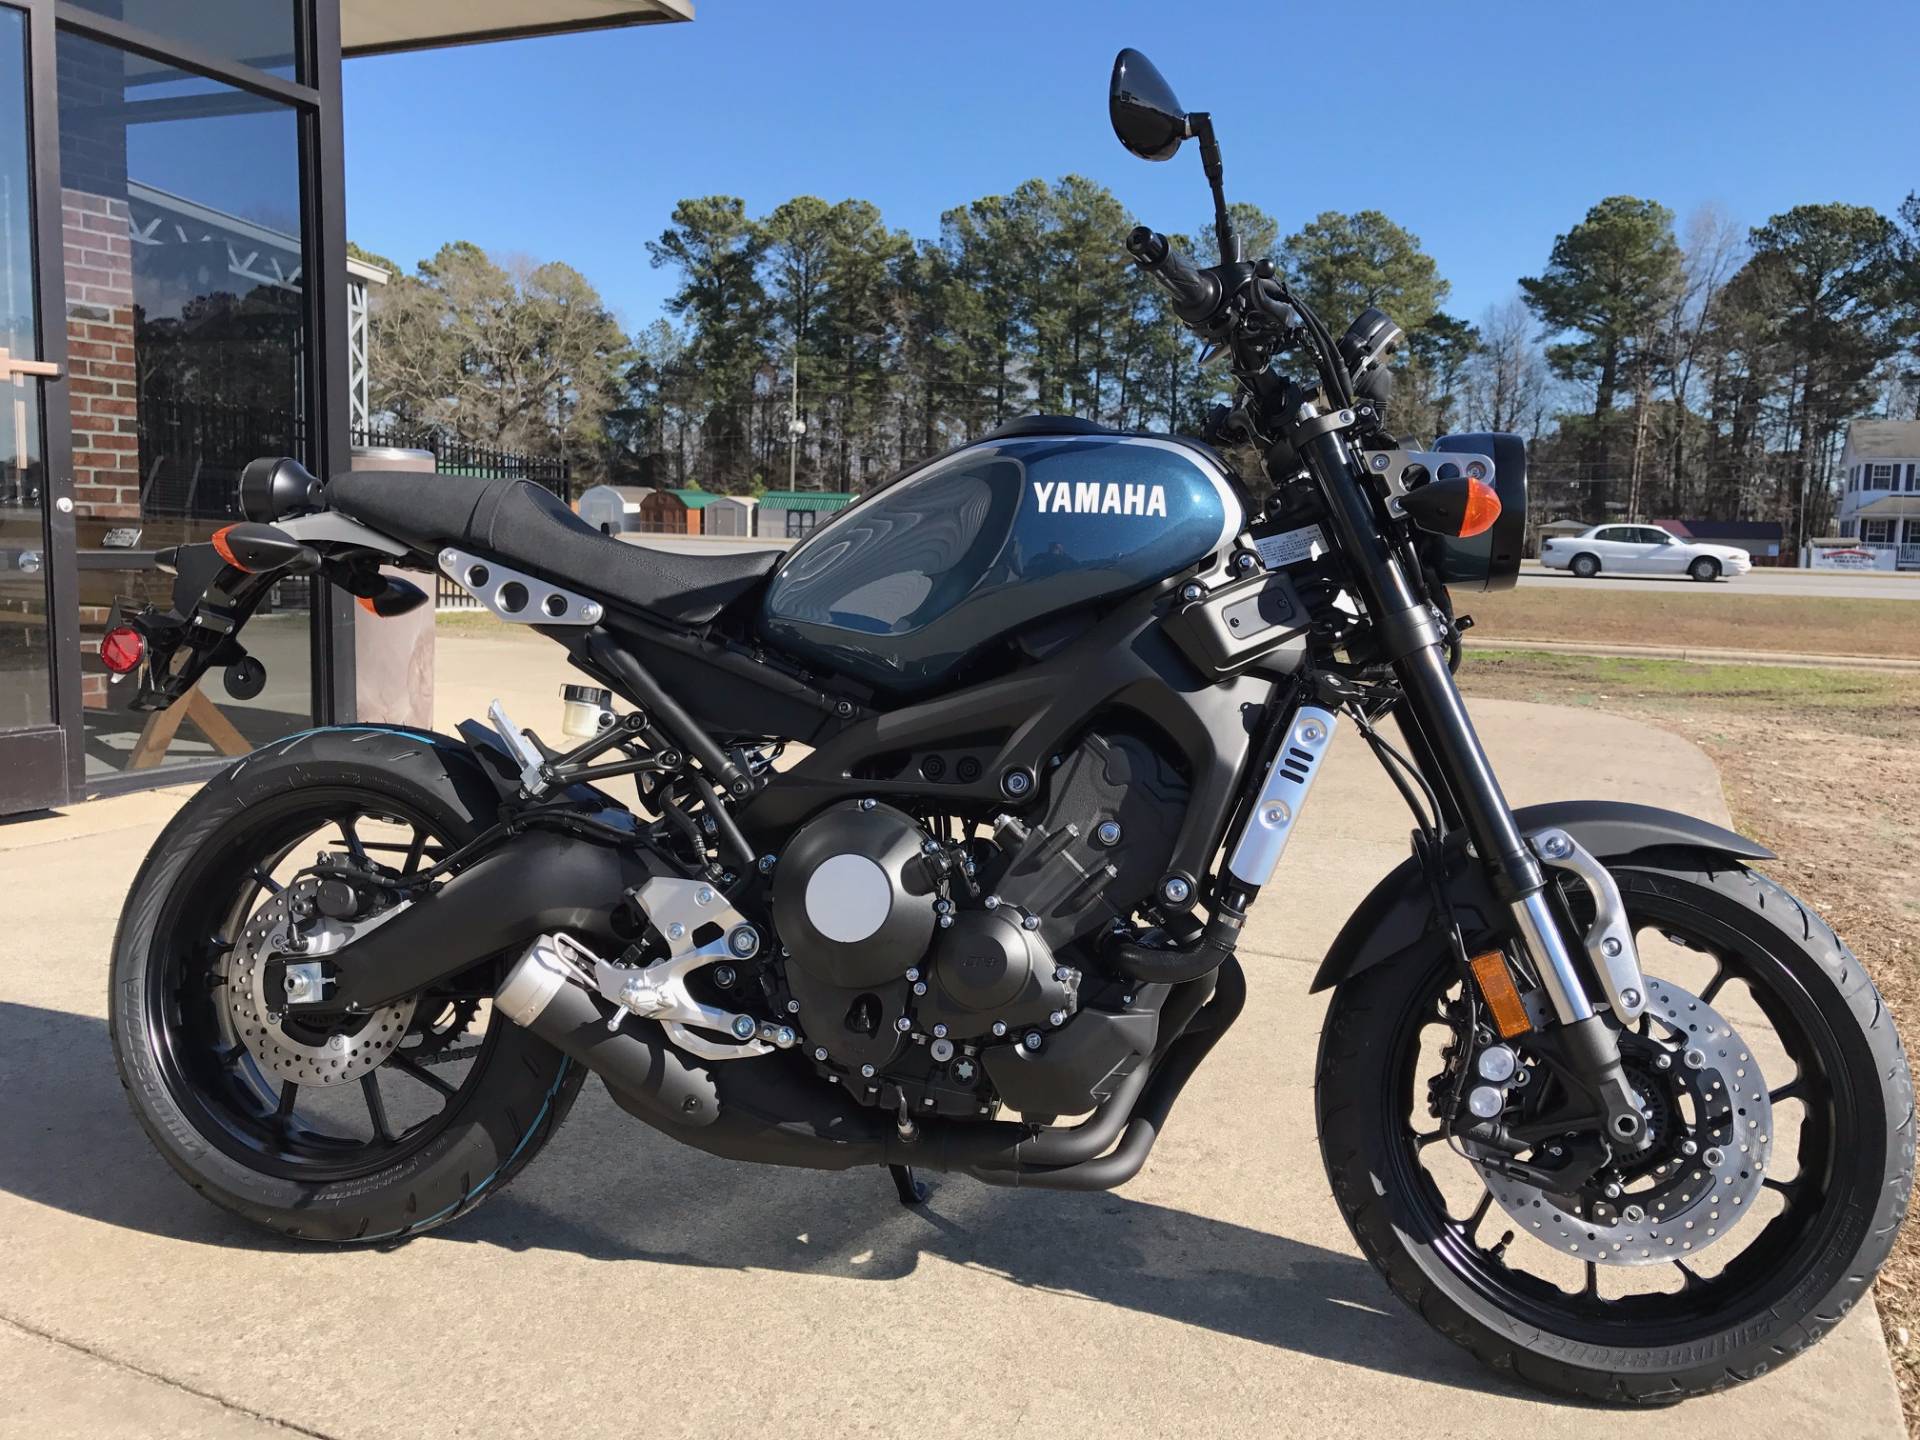 New 2017 Yamaha XSR900 Motorcycles in Greenville, NC. Stock Number